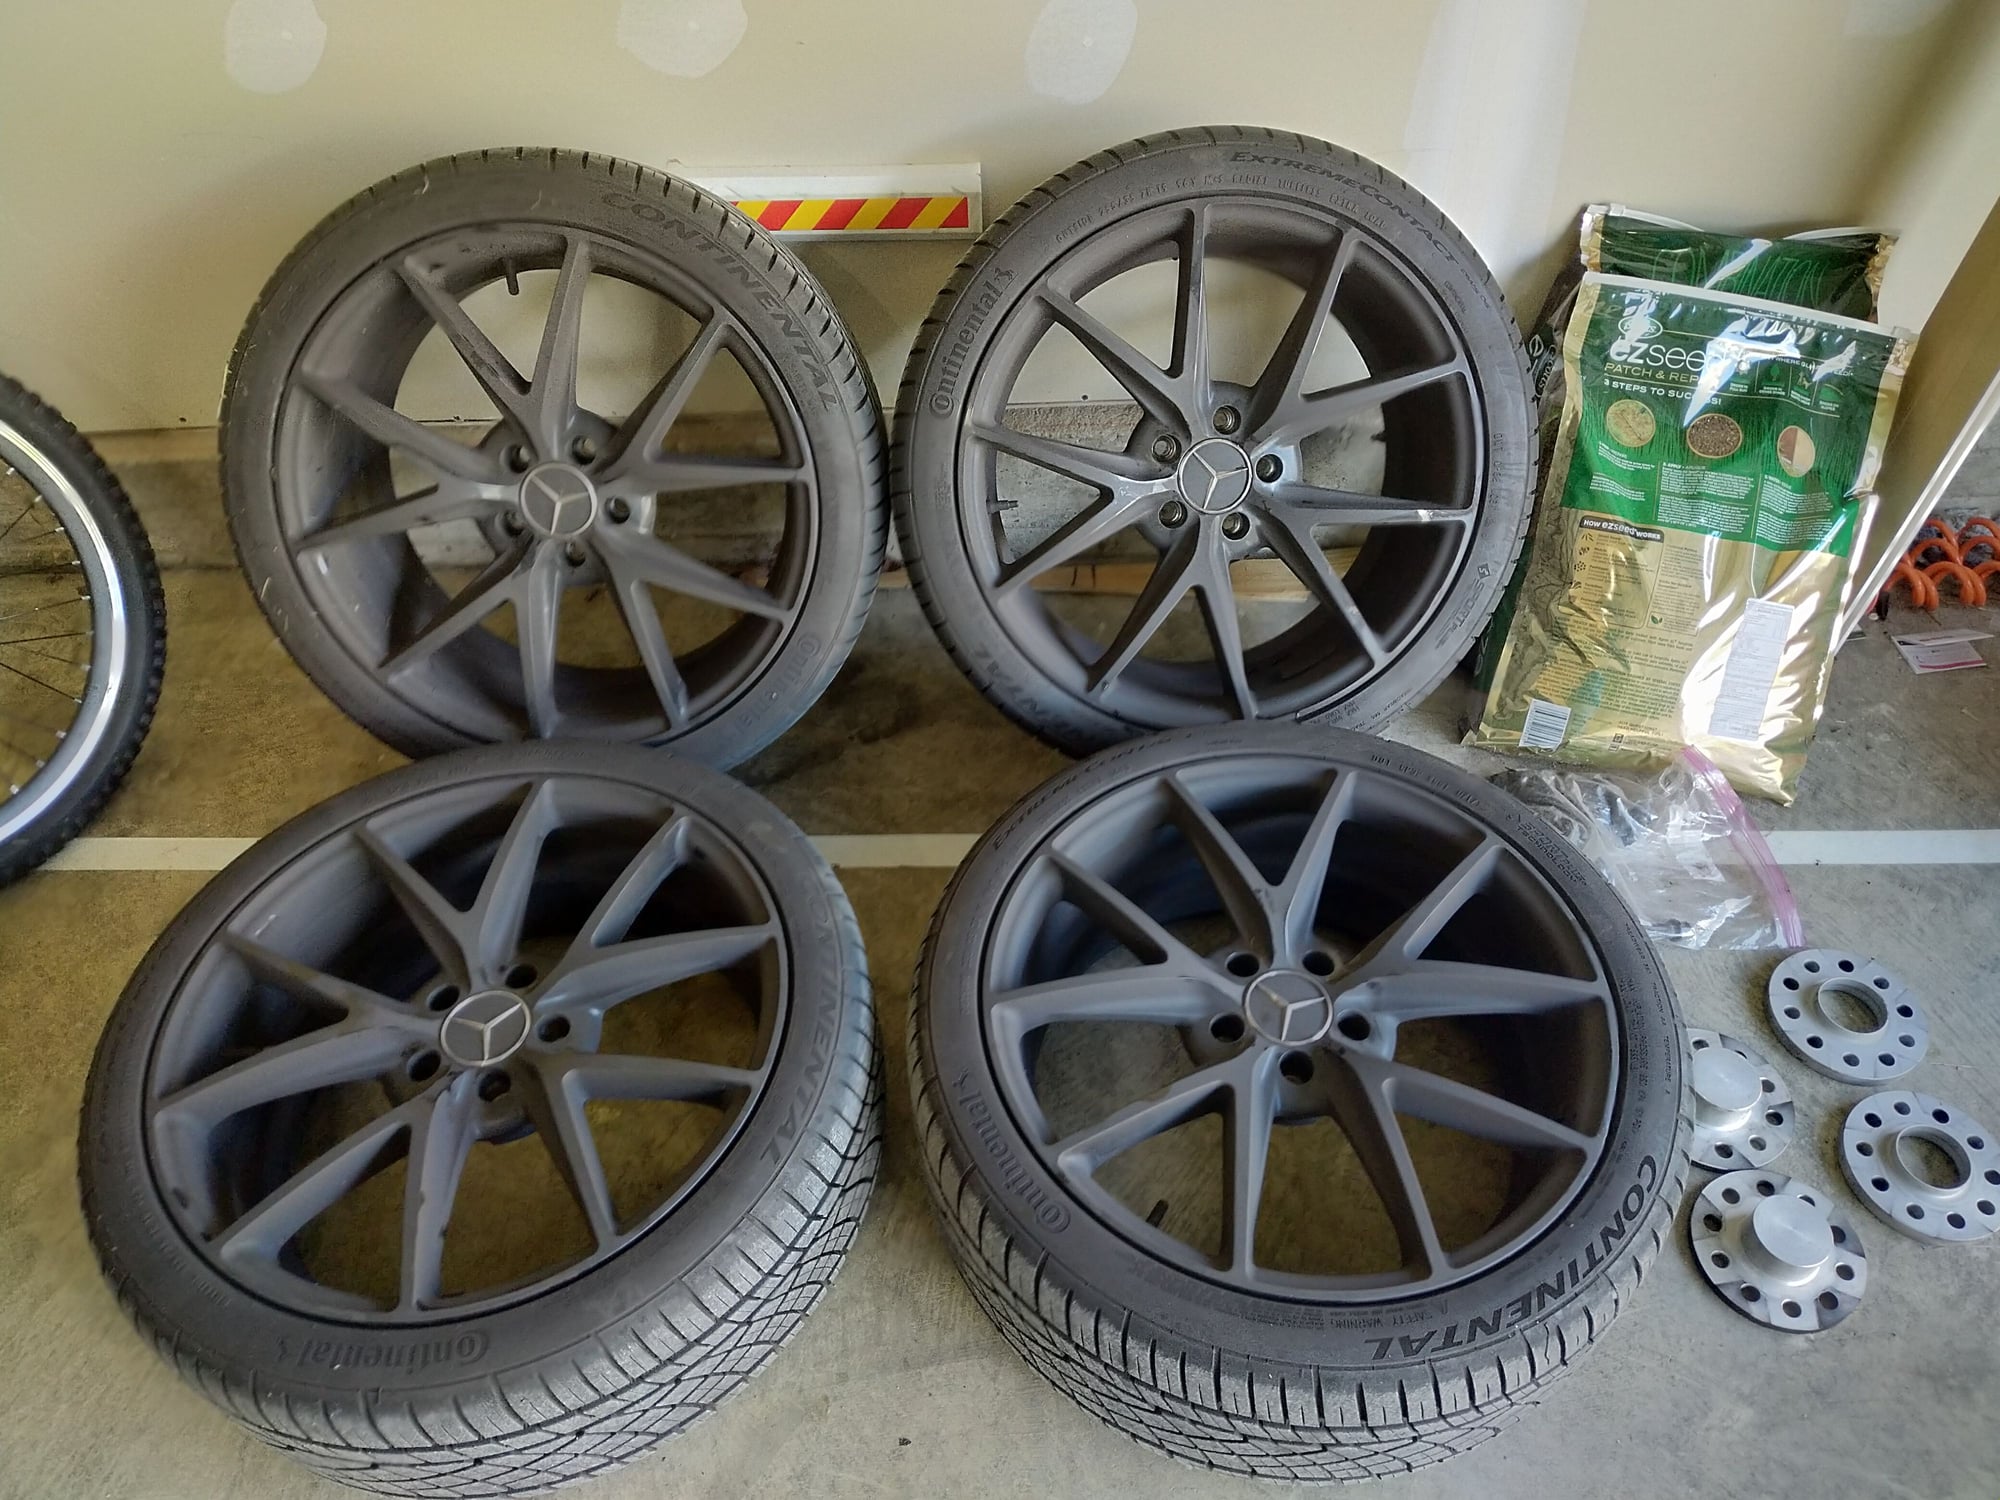 Wheels and Tires/Axles - C450/C43 aftermarket Niche Misanos with tires and spacers - Used - 2016 Mercedes-Benz C450 AMG - 2017 to 2019 Mercedes-Benz C43 AMG - 2015 to 2019 Mercedes-Benz C300 - Waldorf, MD 20601, United States